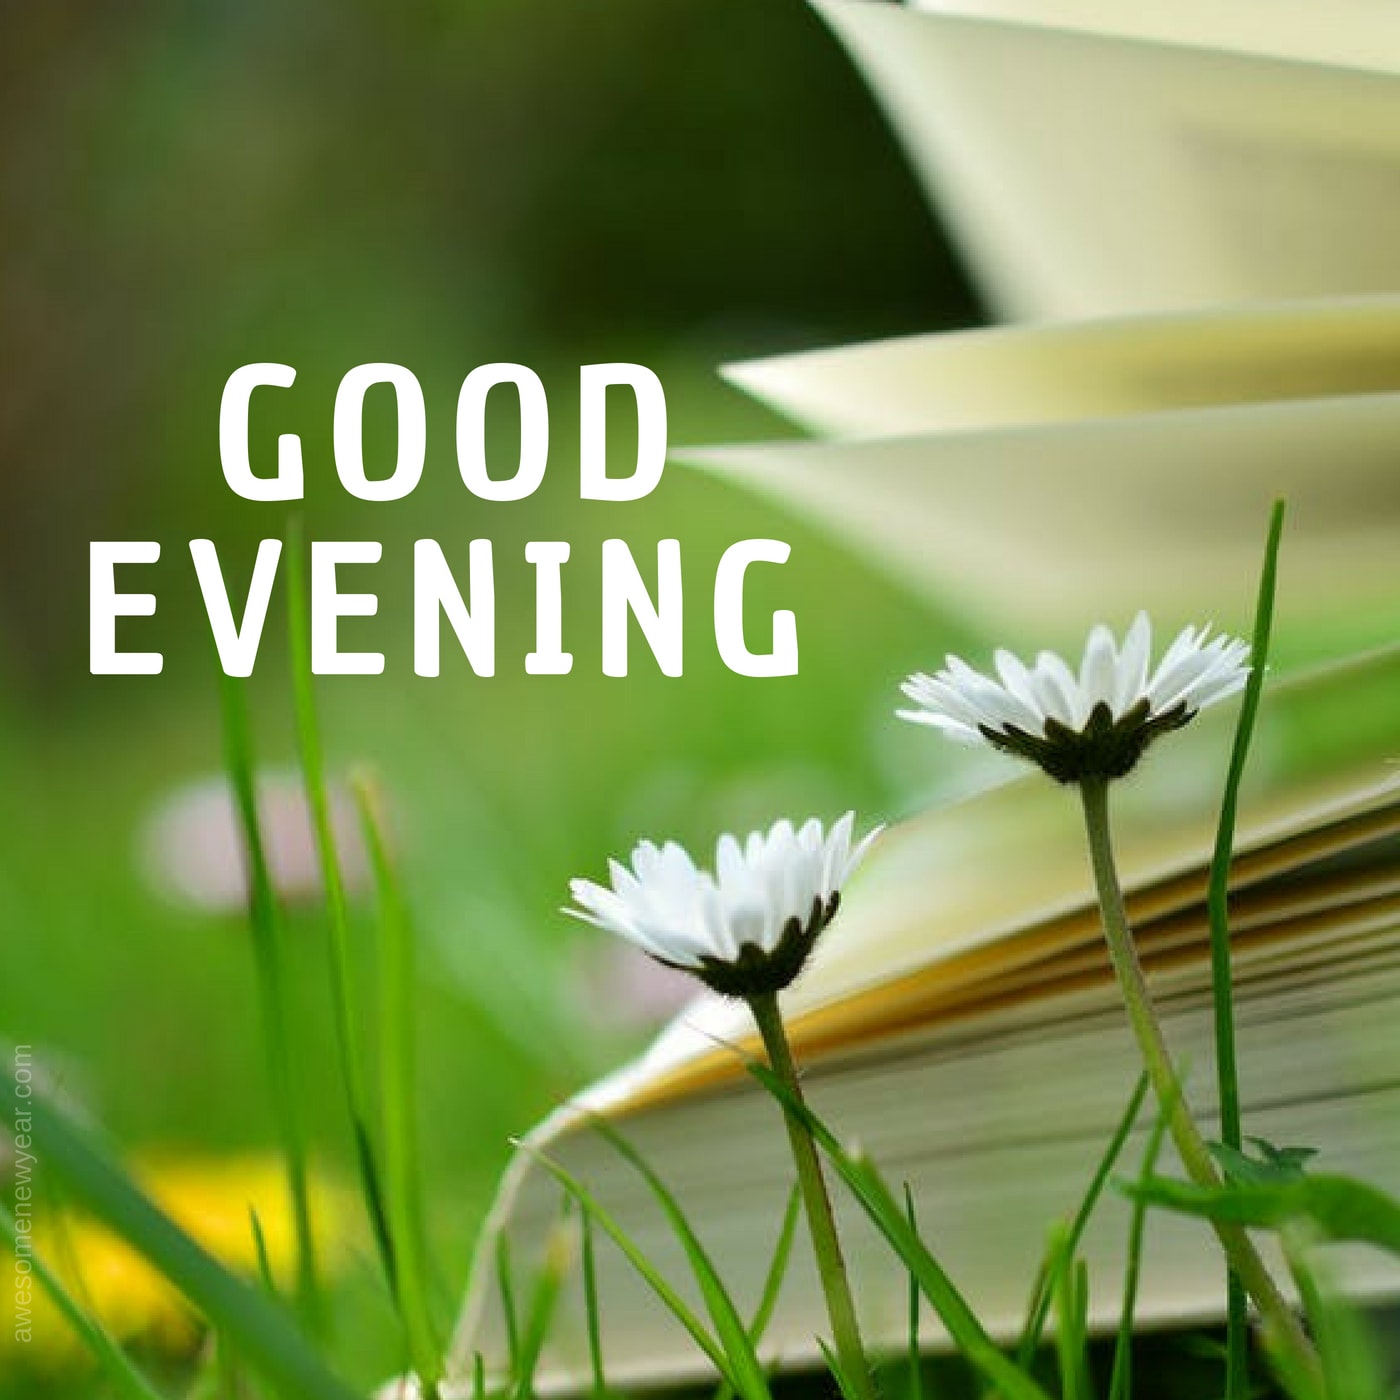 Evening Images wishes